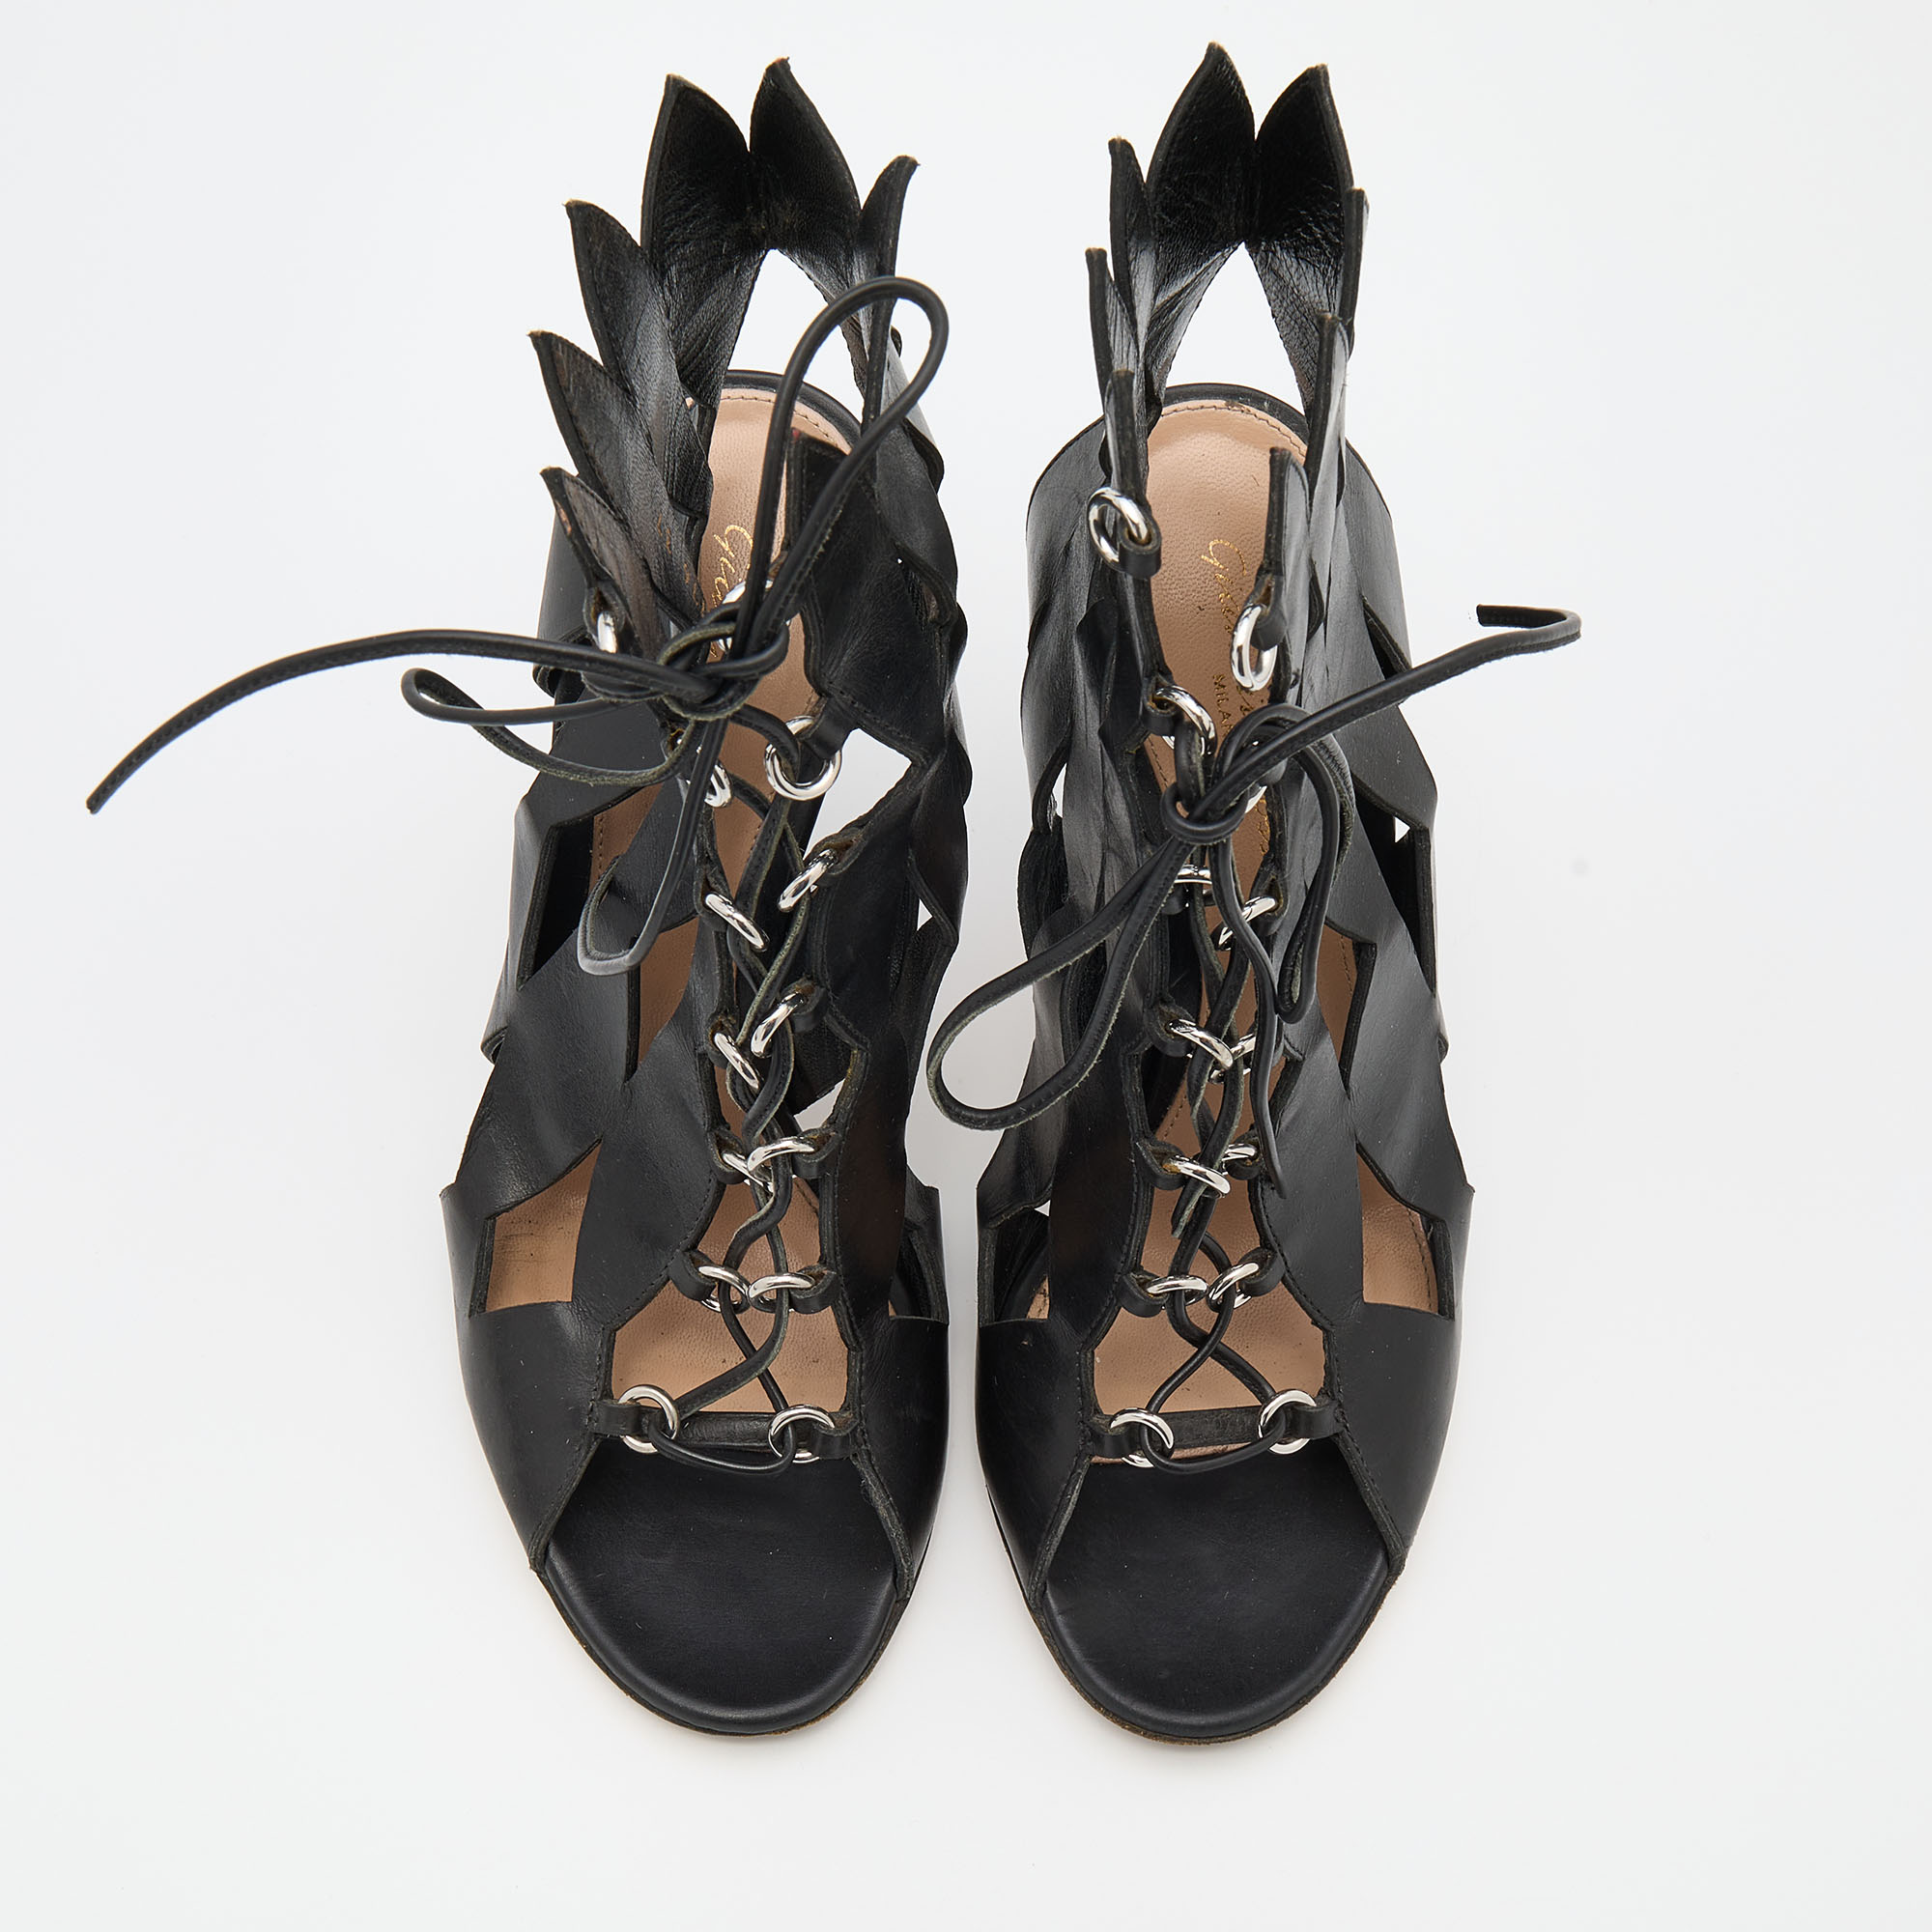 Gianvito Rossi Black Cutout Leather Lace Up Ankle Booties Size 37